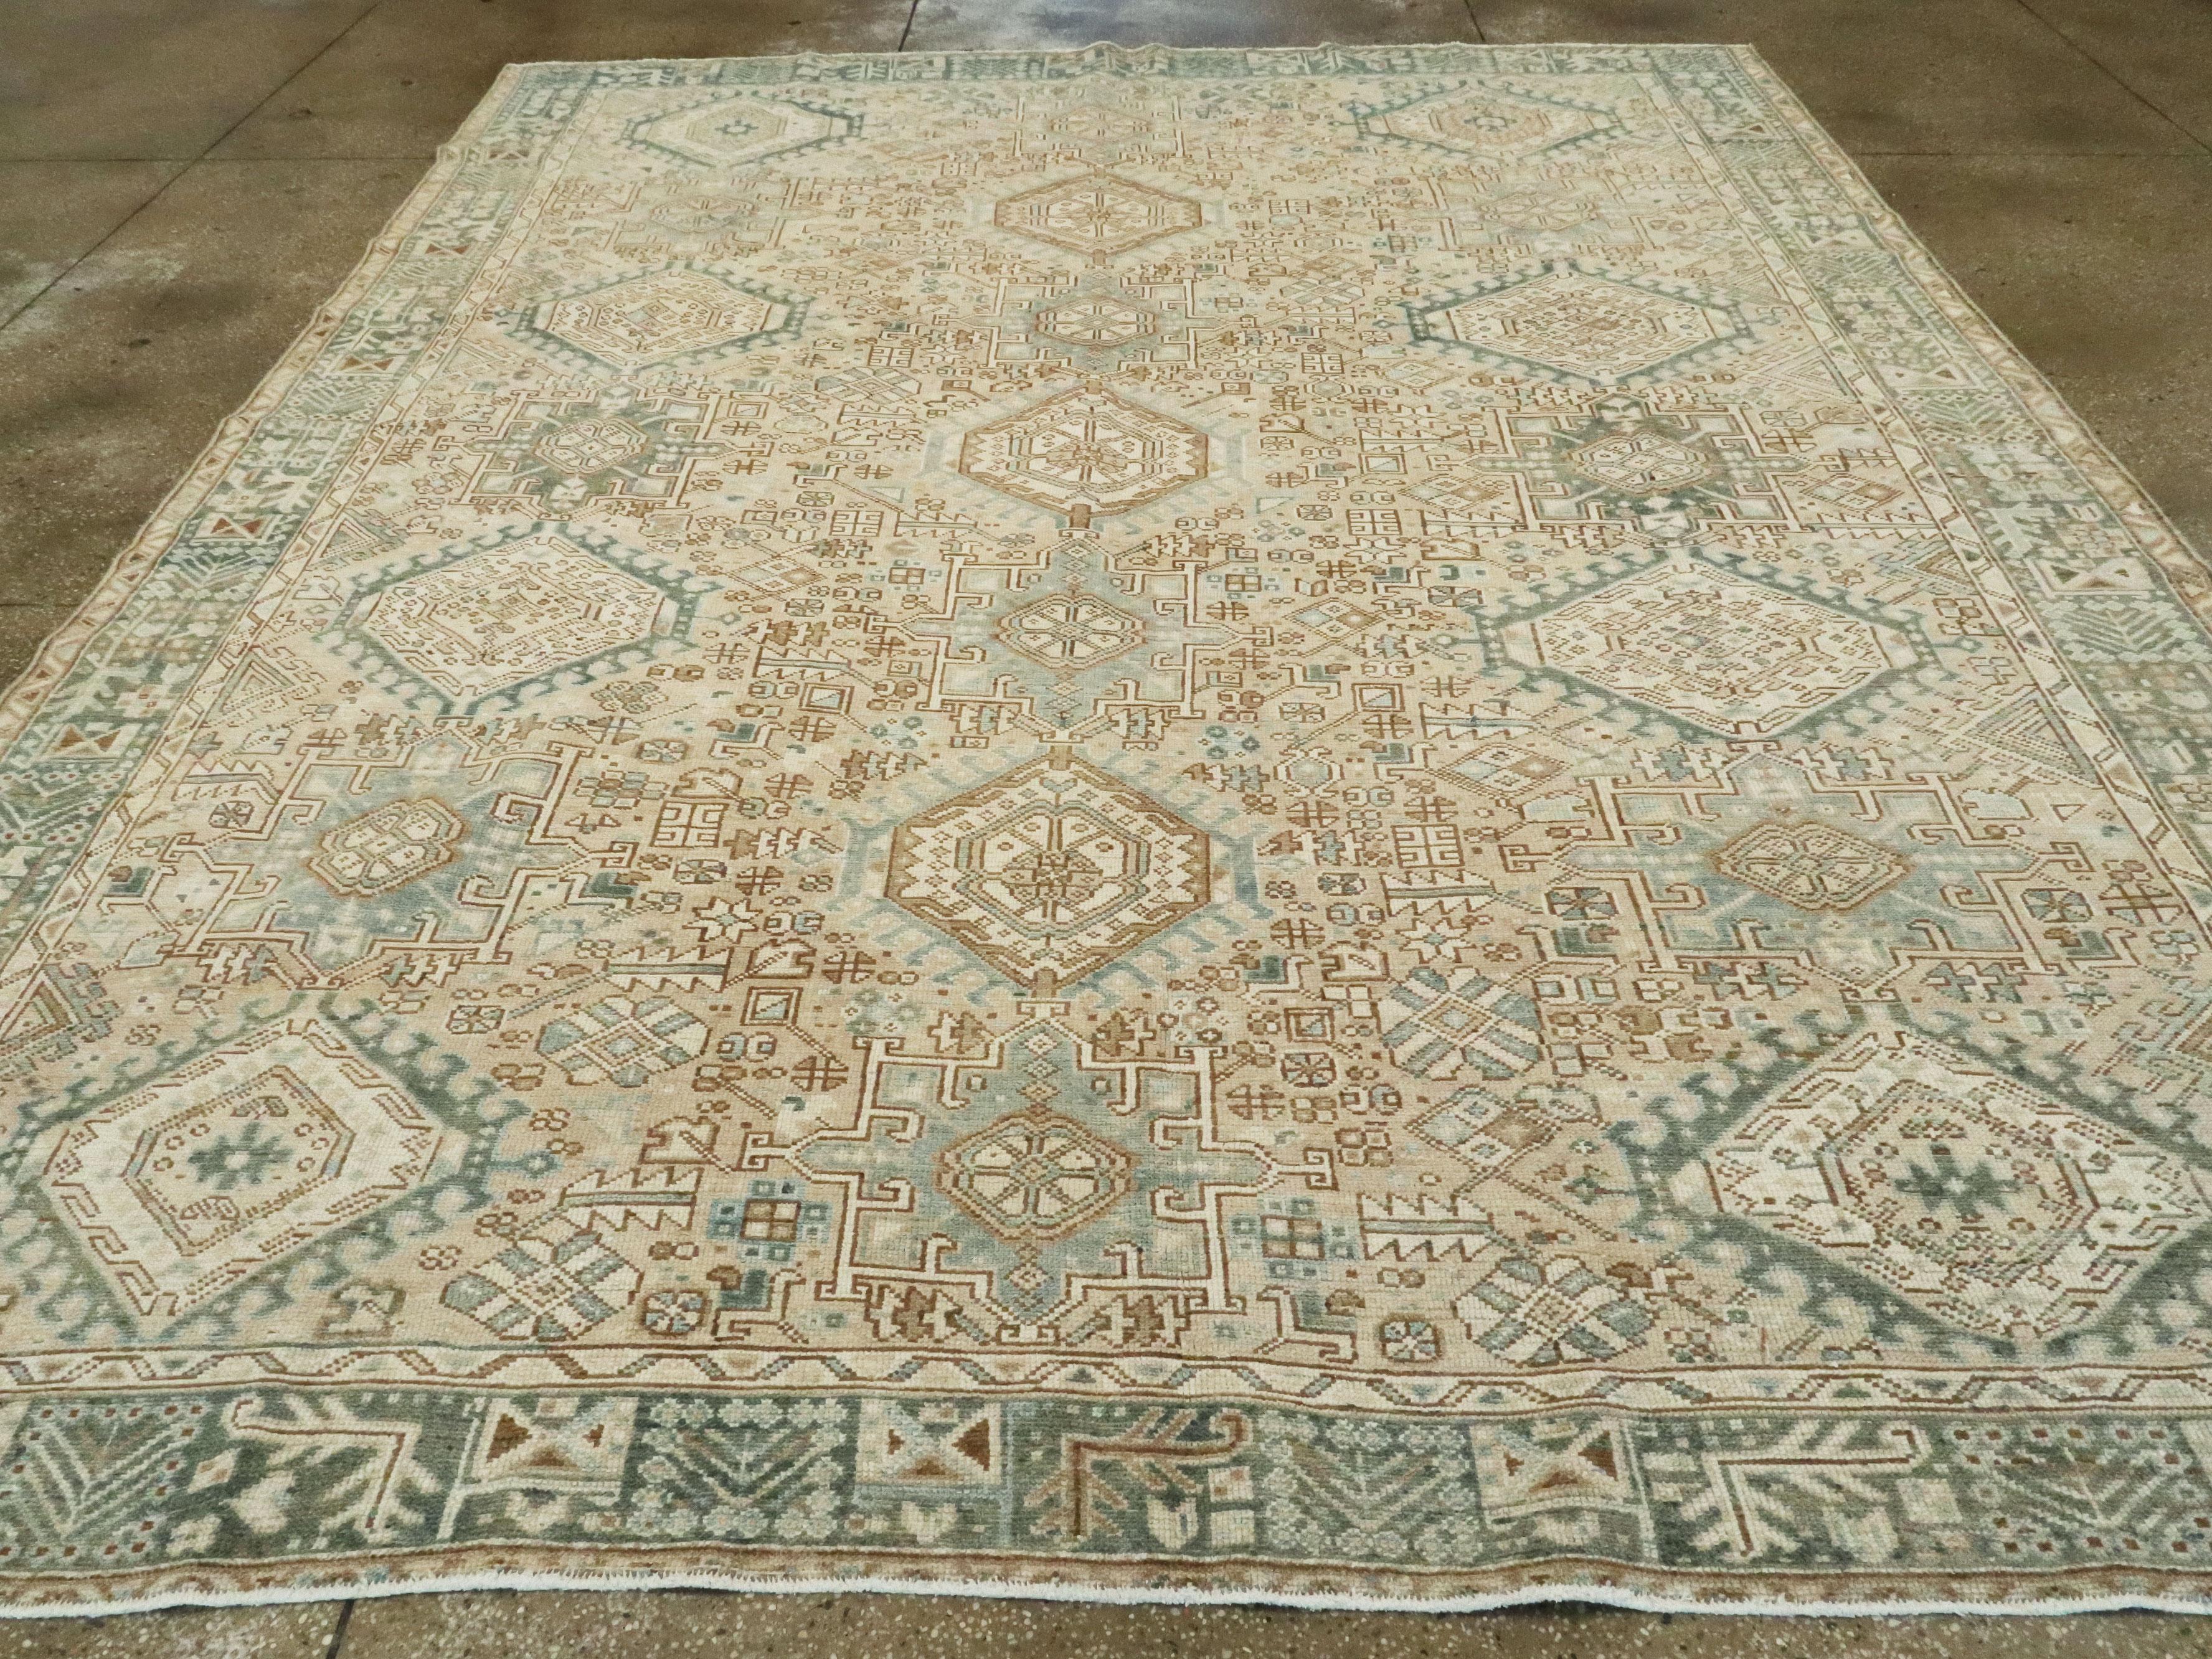 20th Century Mid-Century Persian Room Size Carpet With A Tribal Design In Teal and Sand Color